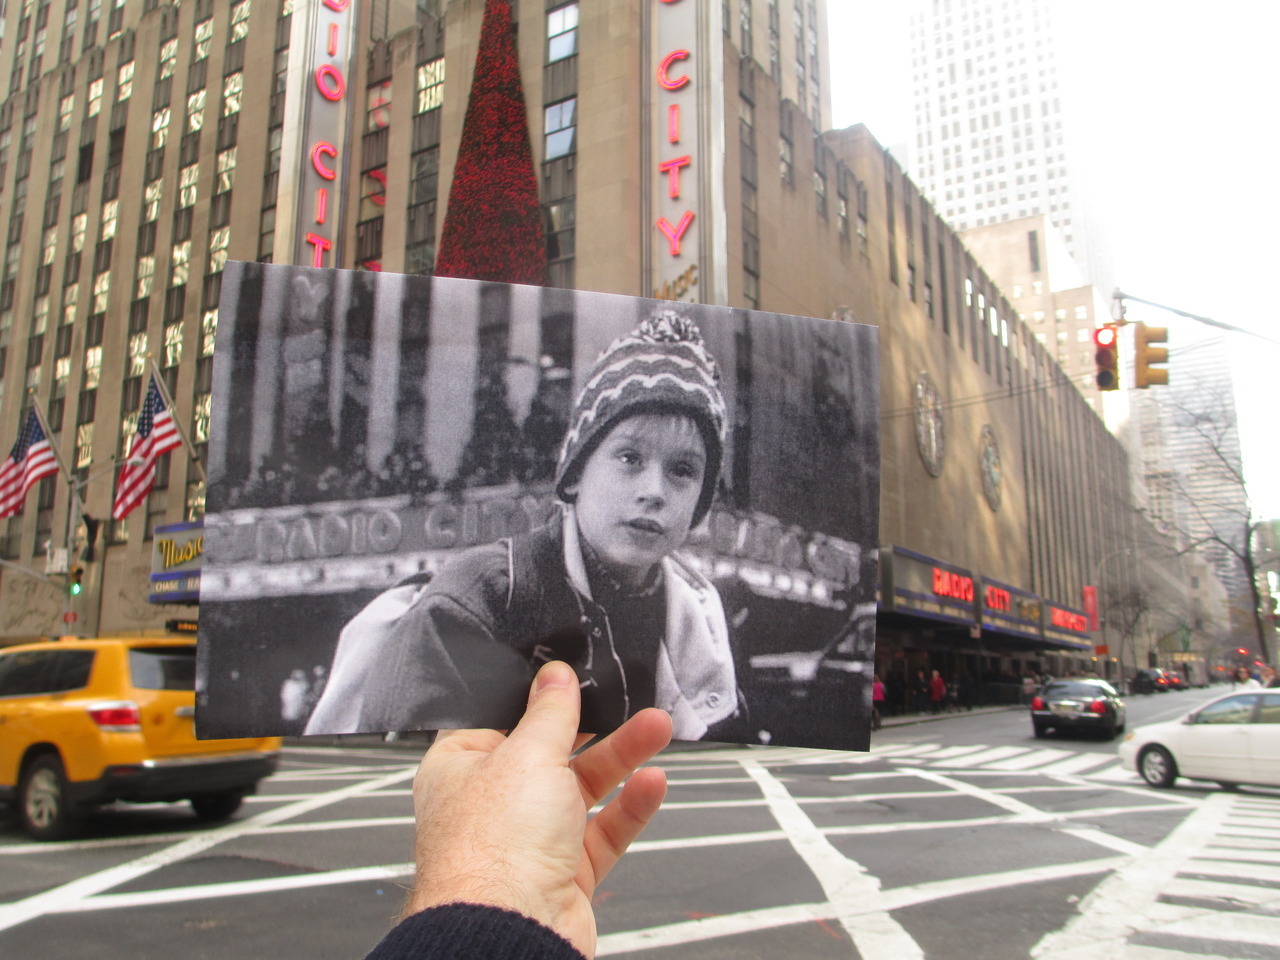 Home Alone 2: Lost in New York (1992)<br /><br />
Posted by: @Moloknee